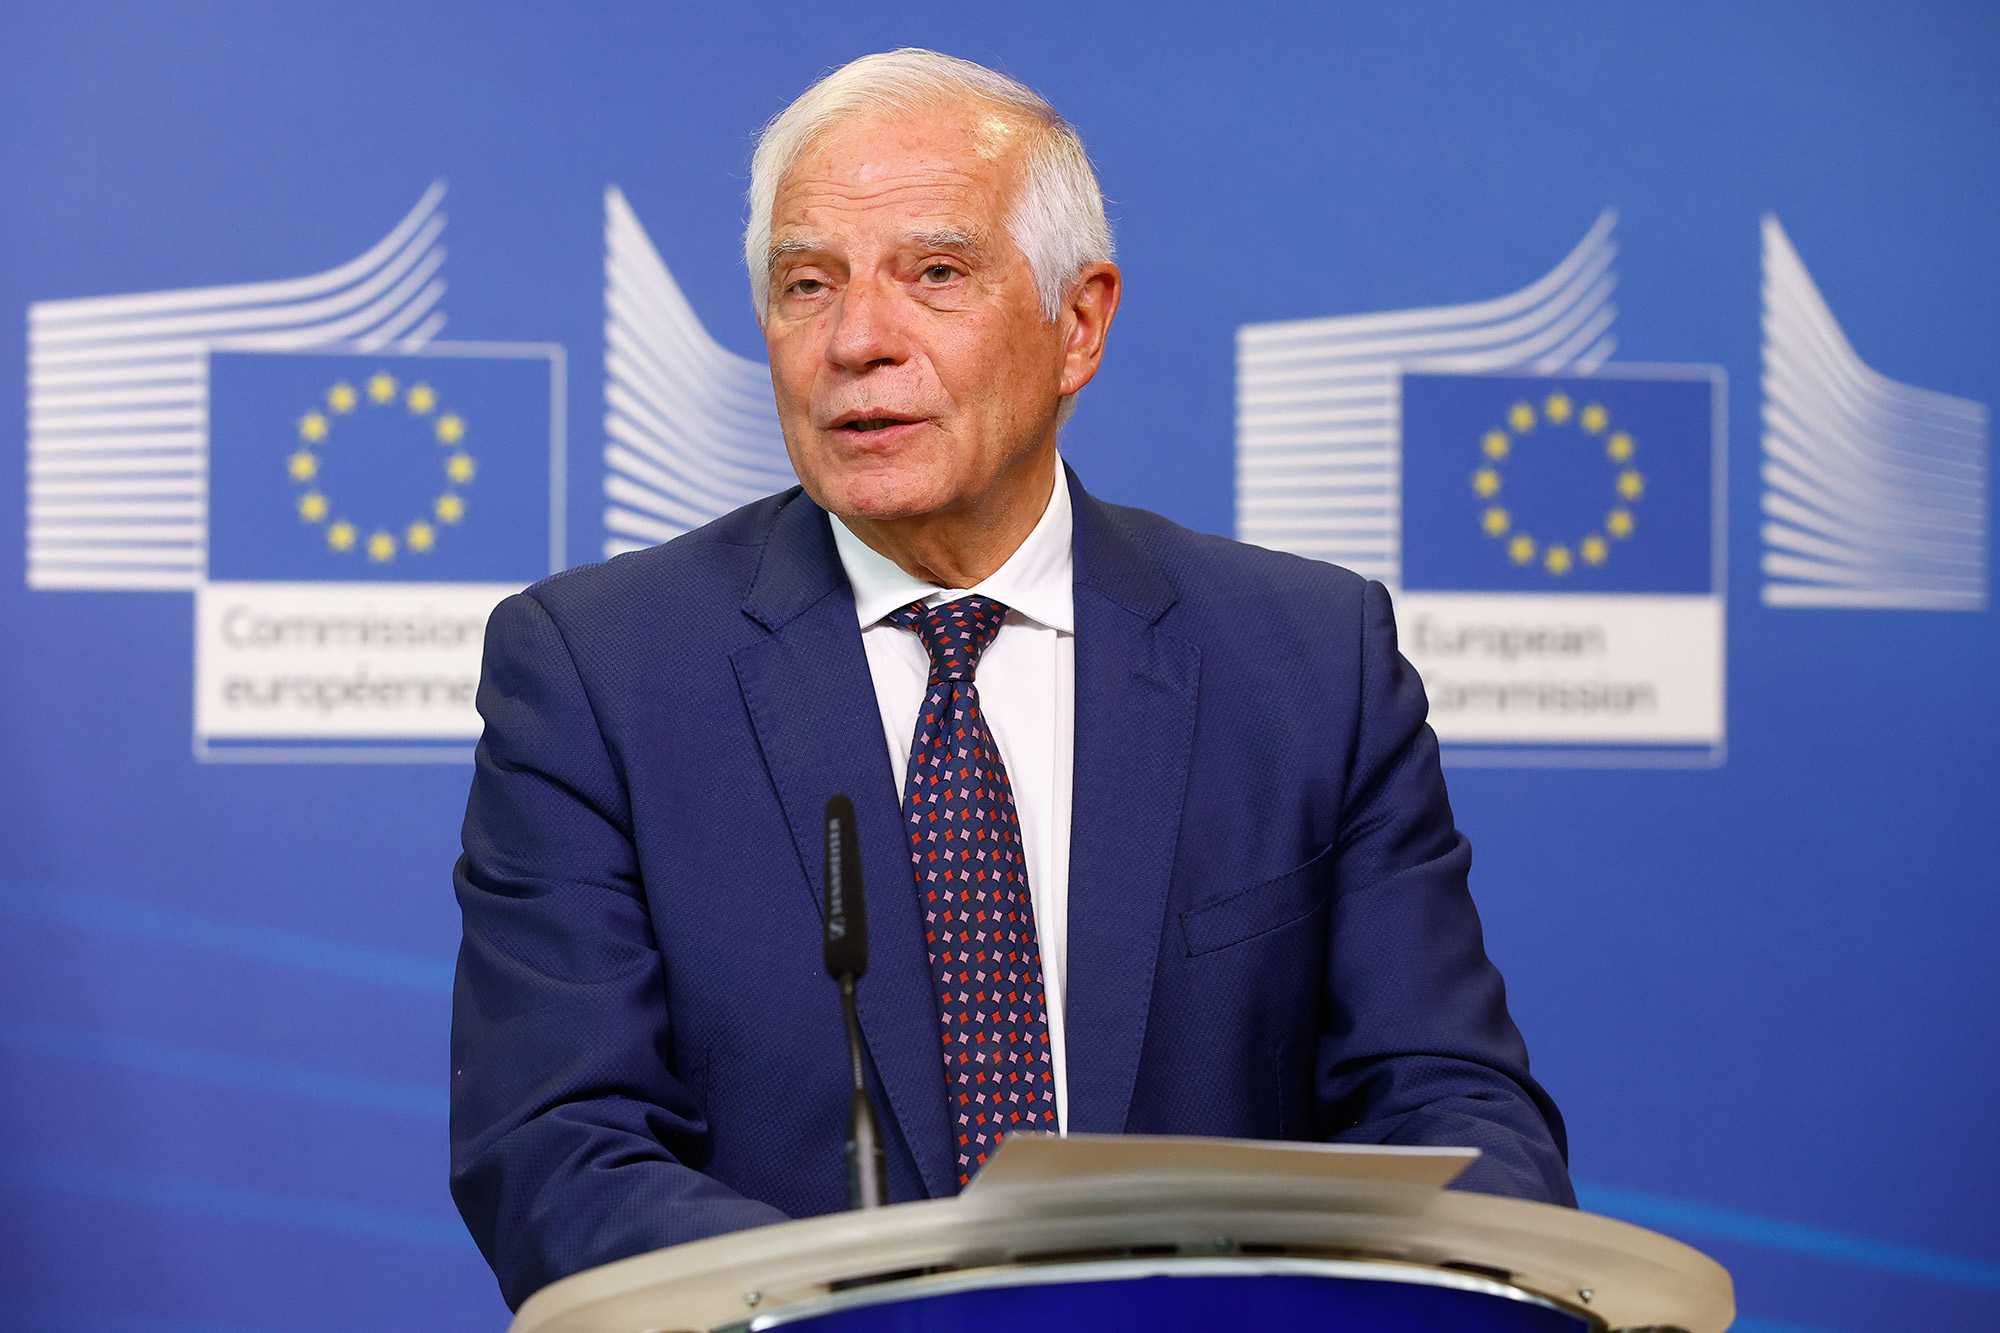 EU High Representative for Foreign Affairs and Security Policy and European Commission Vice-President, Josep Borrell speaks to the press at the European Commission in Brussels, Belgium, on September 28.